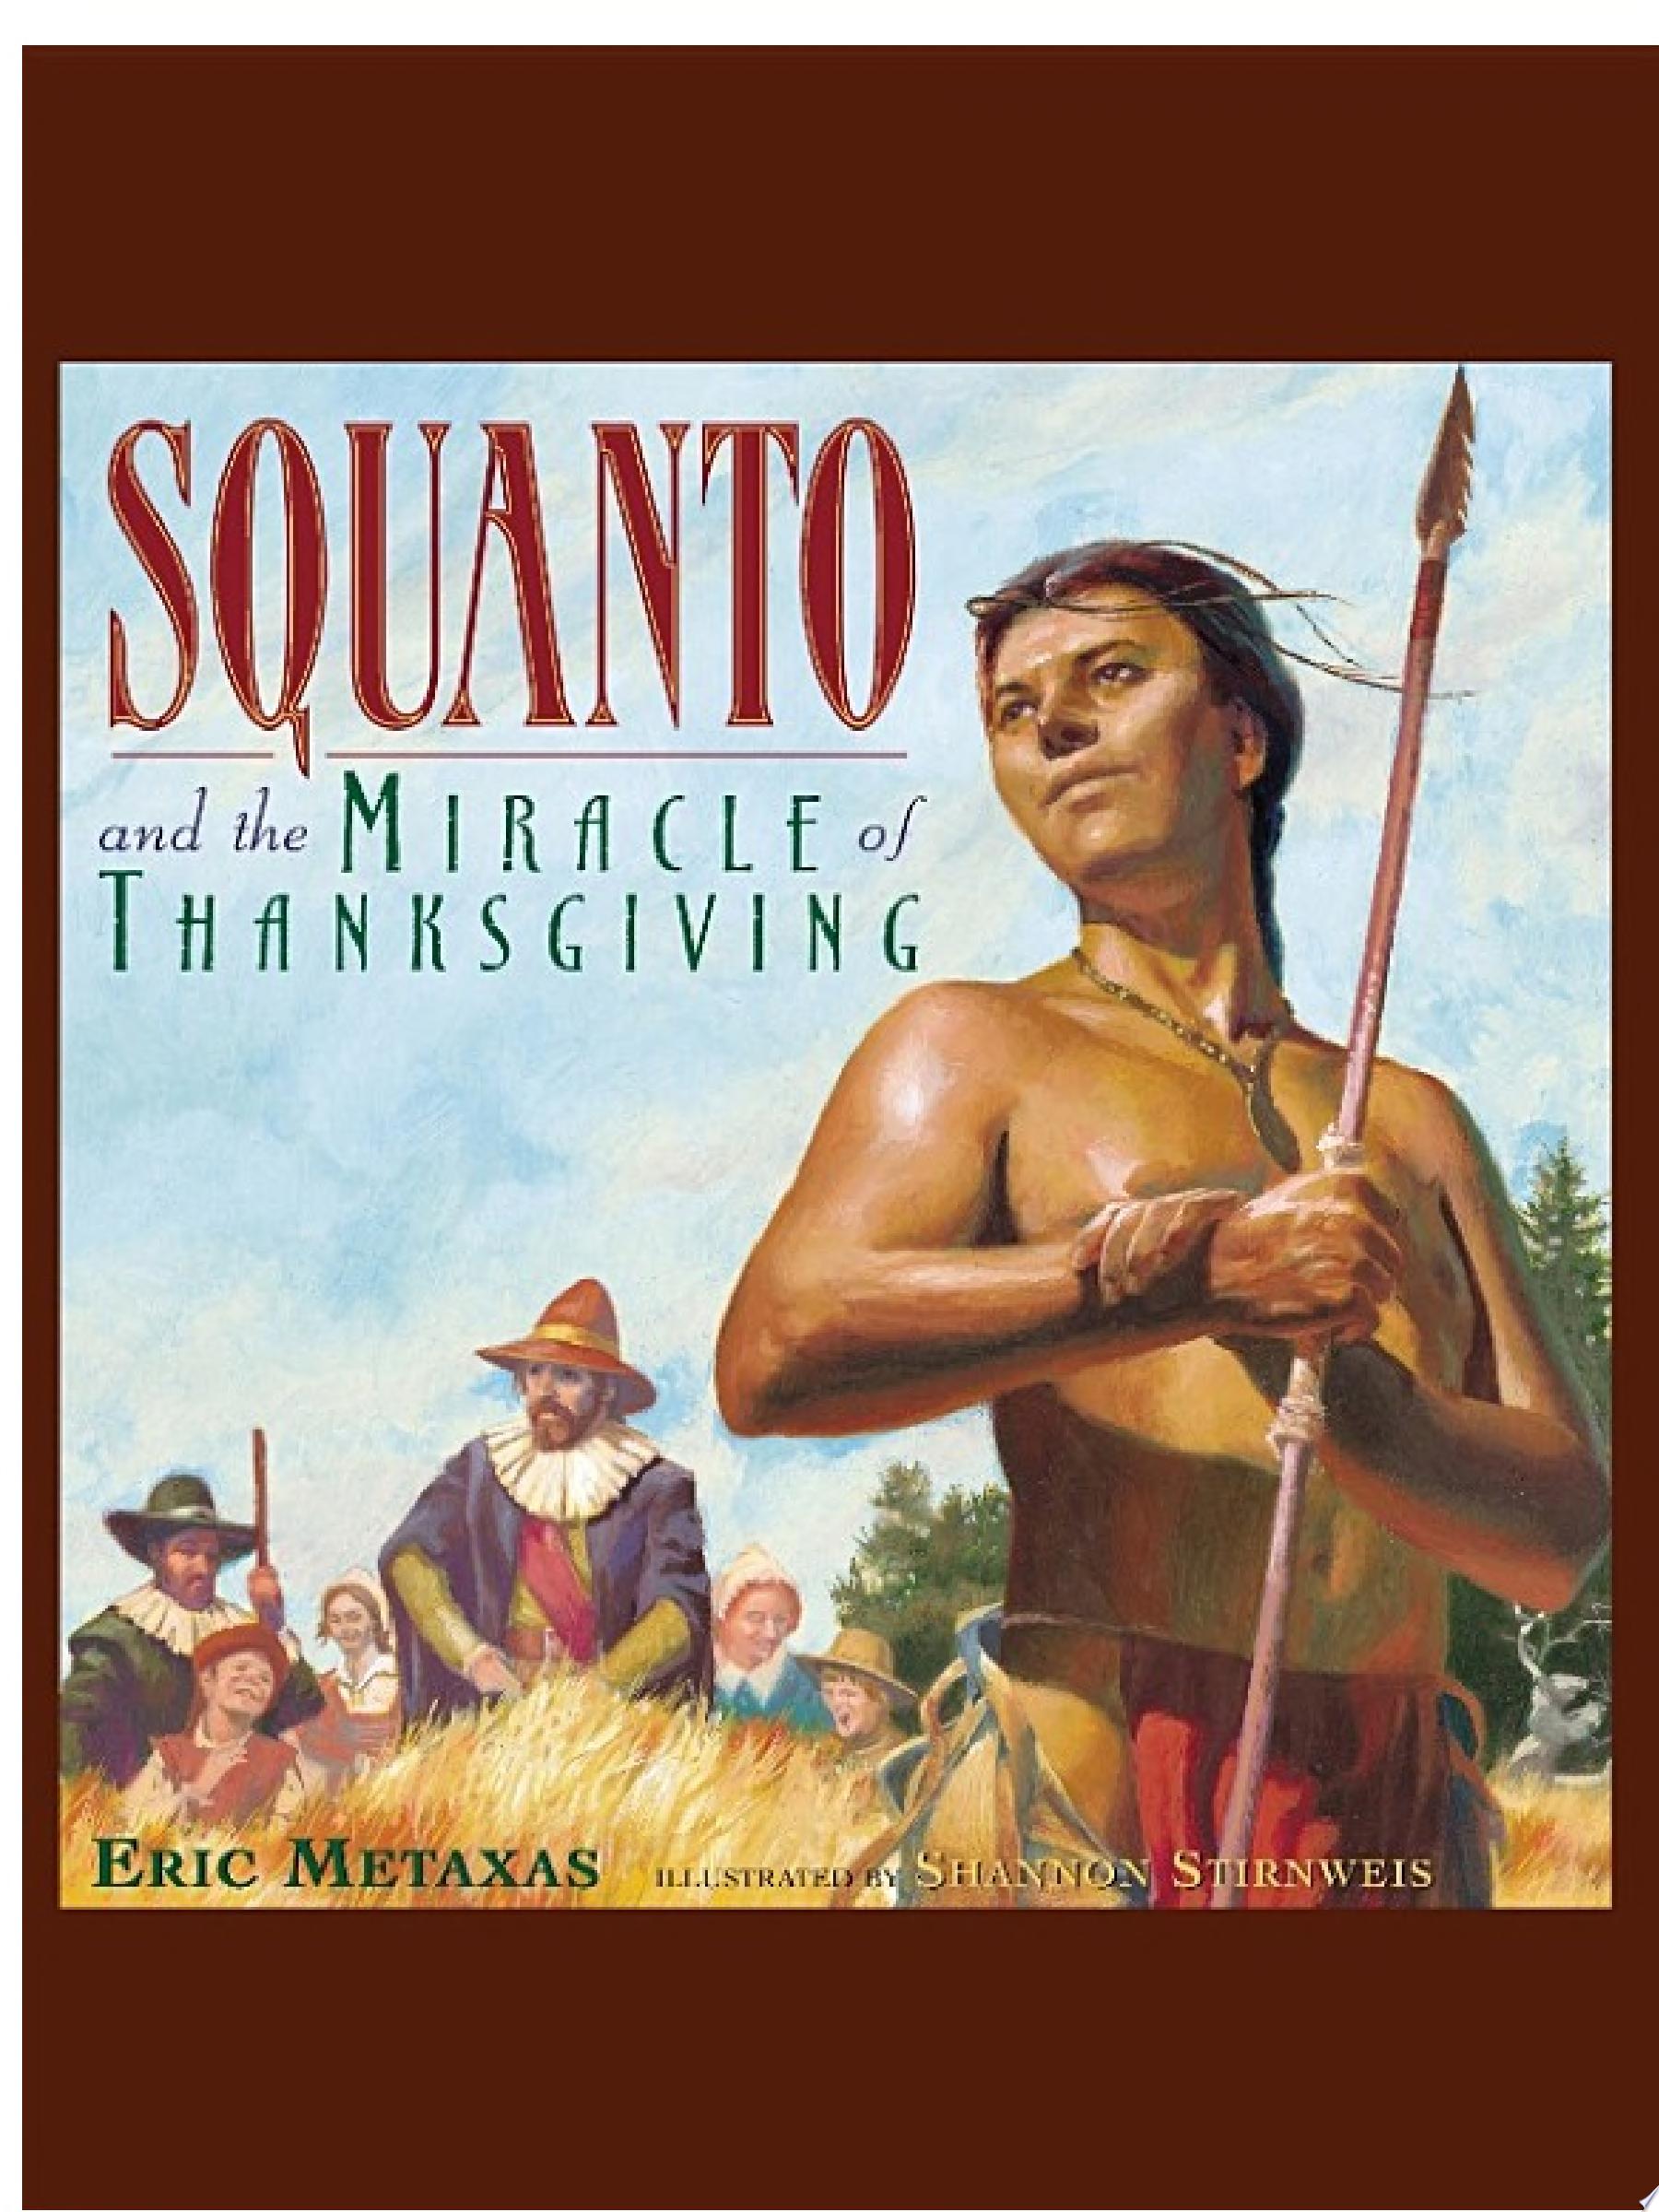 Image for "Squanto and the Miracle of Thanksgiving"